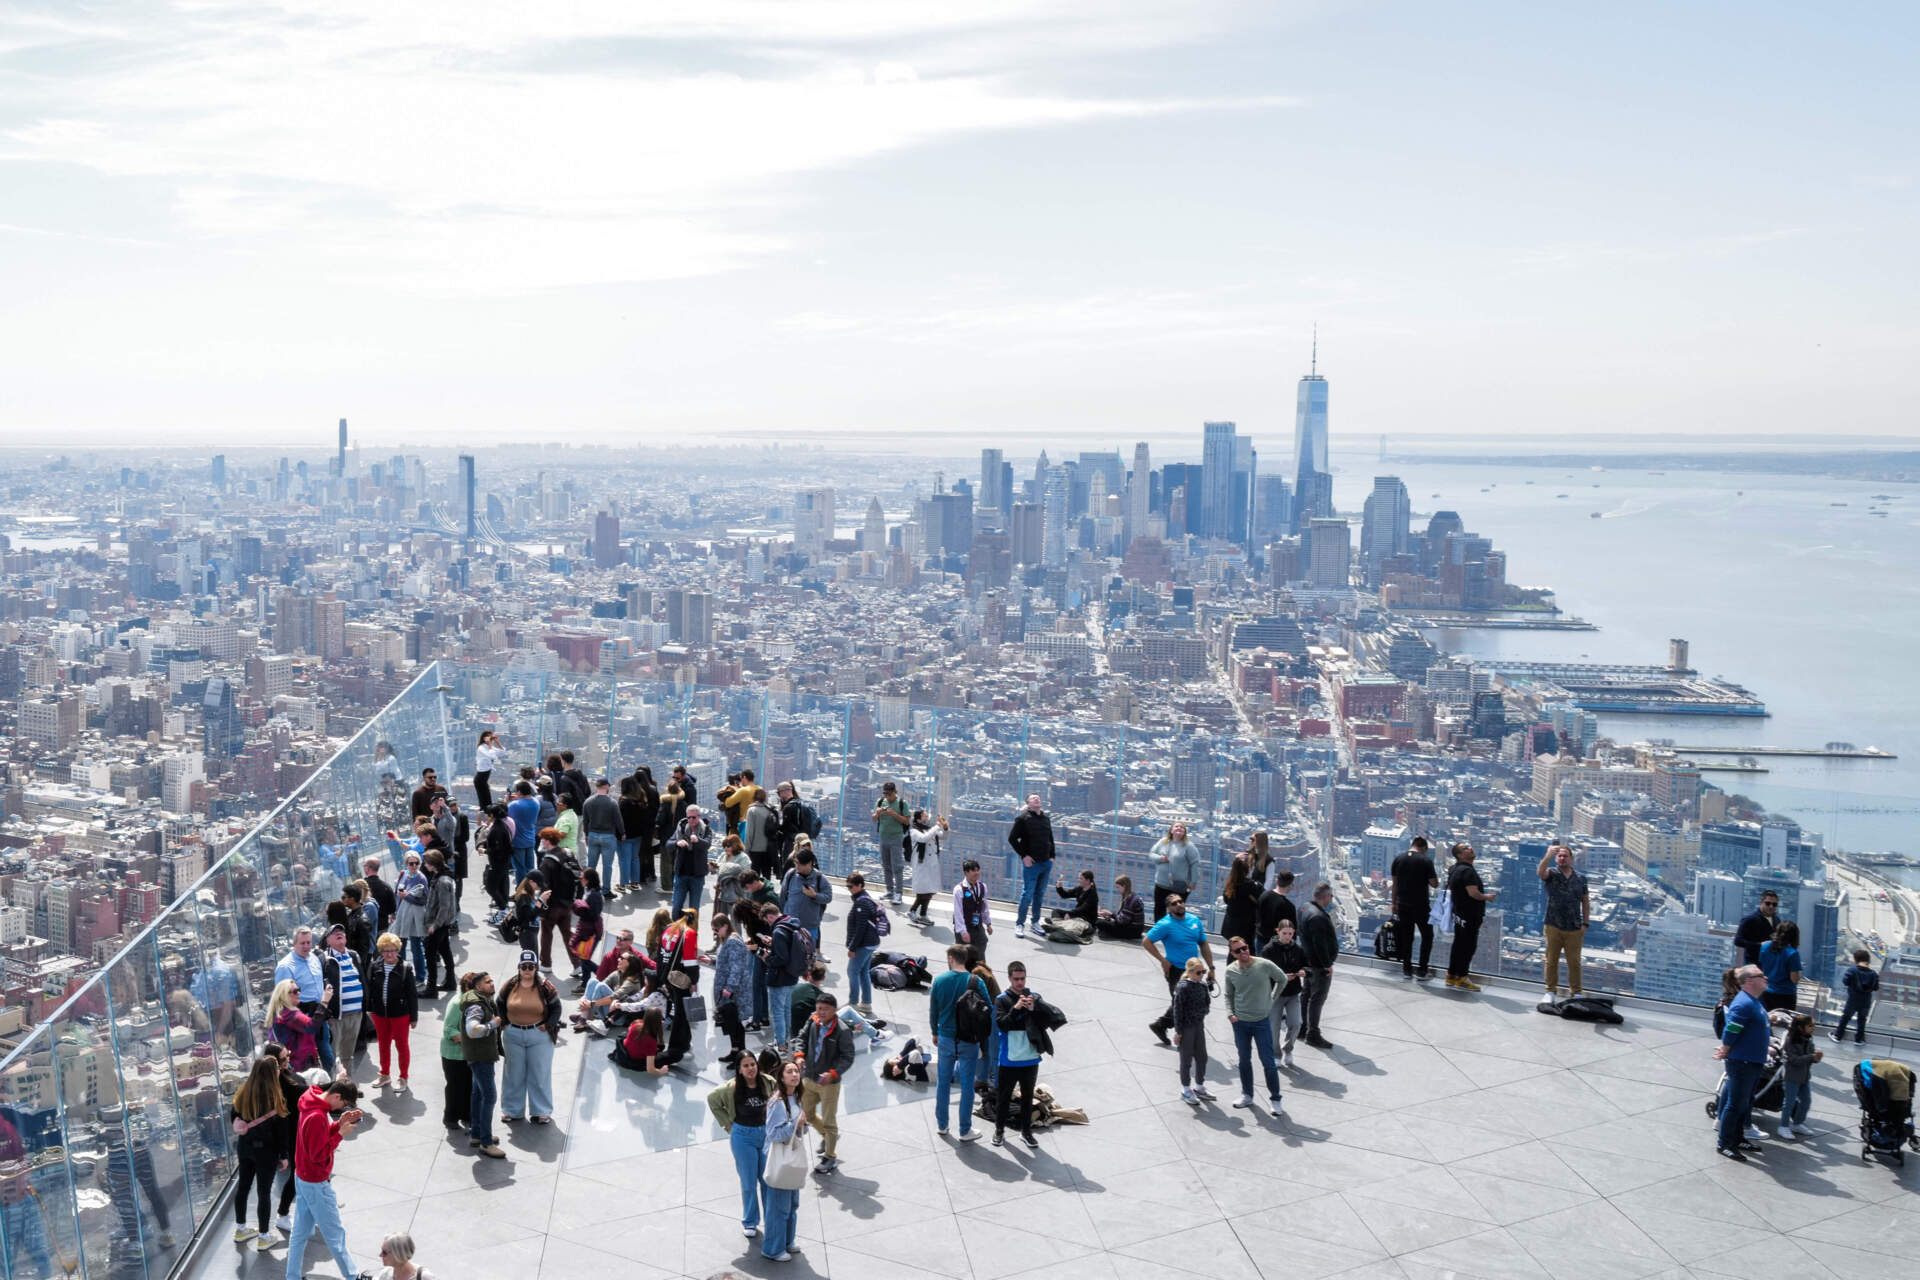 People gather on 'The Edge' observation deck ahead of a total solar eclipse across North America, in New York City on April 8, 2024. (Charly Triballeau/APF via Getty Images)